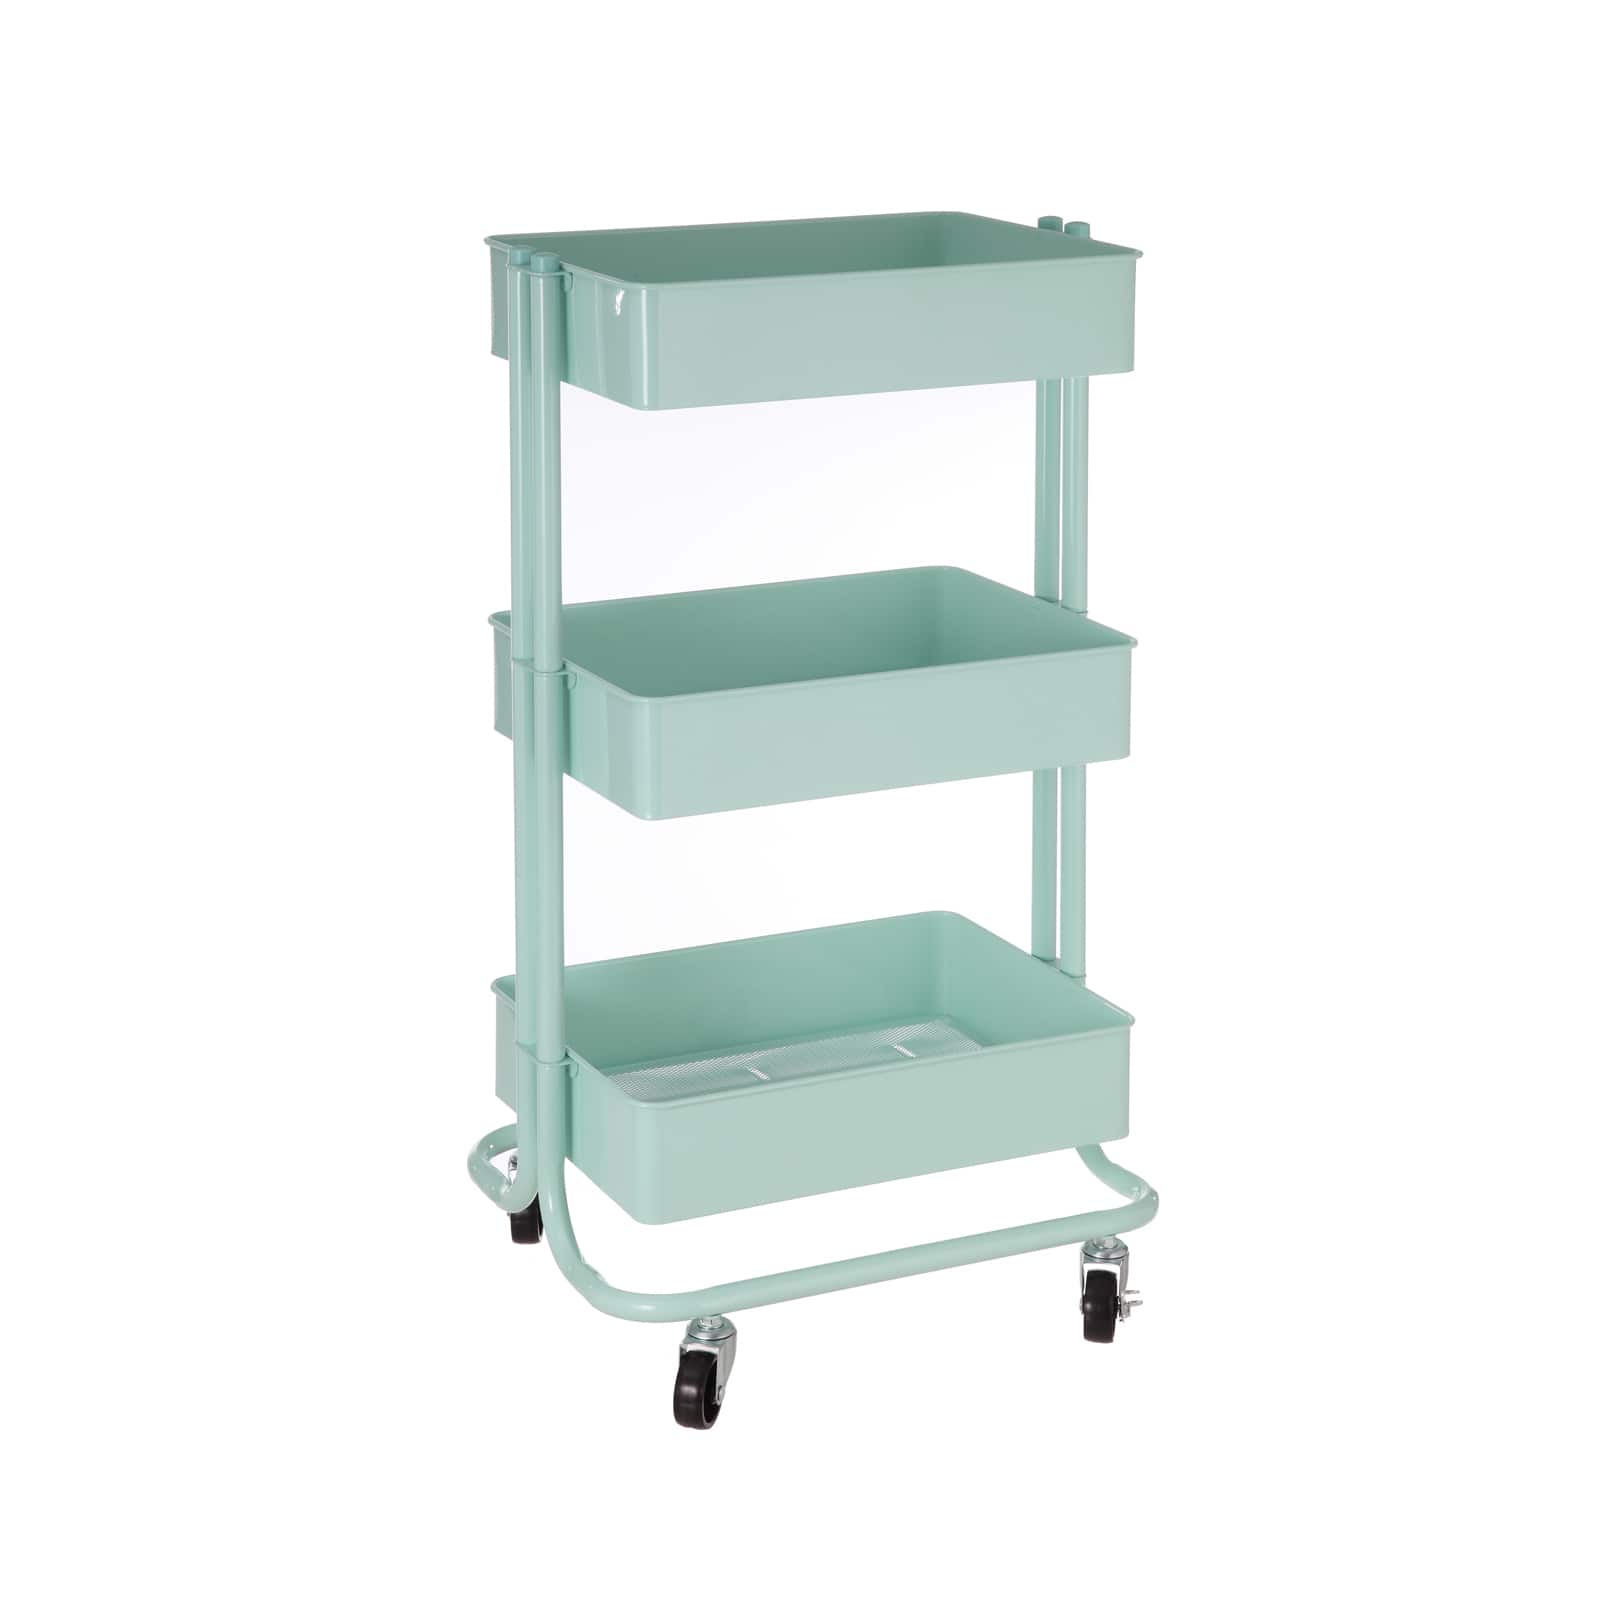 Lontenrea 3-Tier Multifunction Rolling Cart Utility Storage Shelves Cart with Hanging Cup Lockable Wheels and Handle for Office Living Room Kitchen Bathroom White 